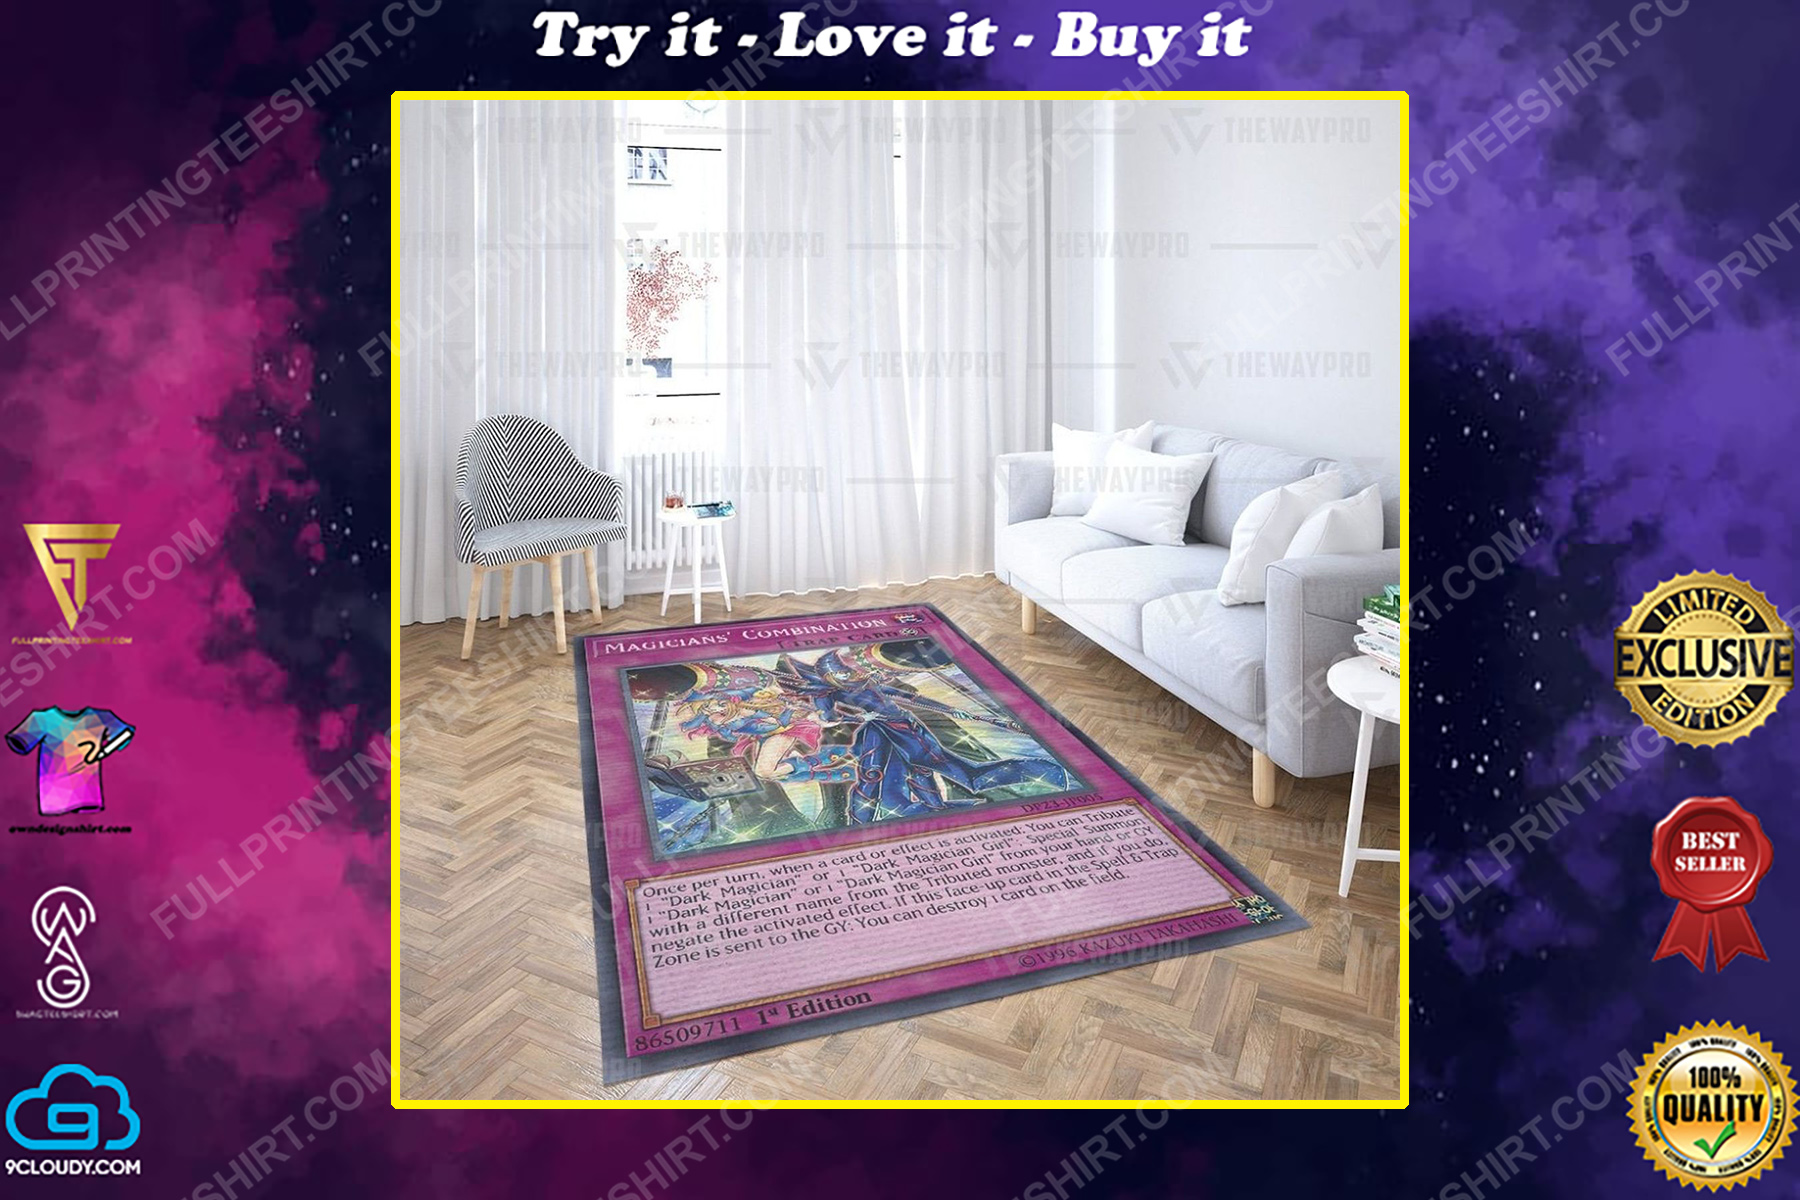 Yu-gi-oh magicians' combination all over print rug